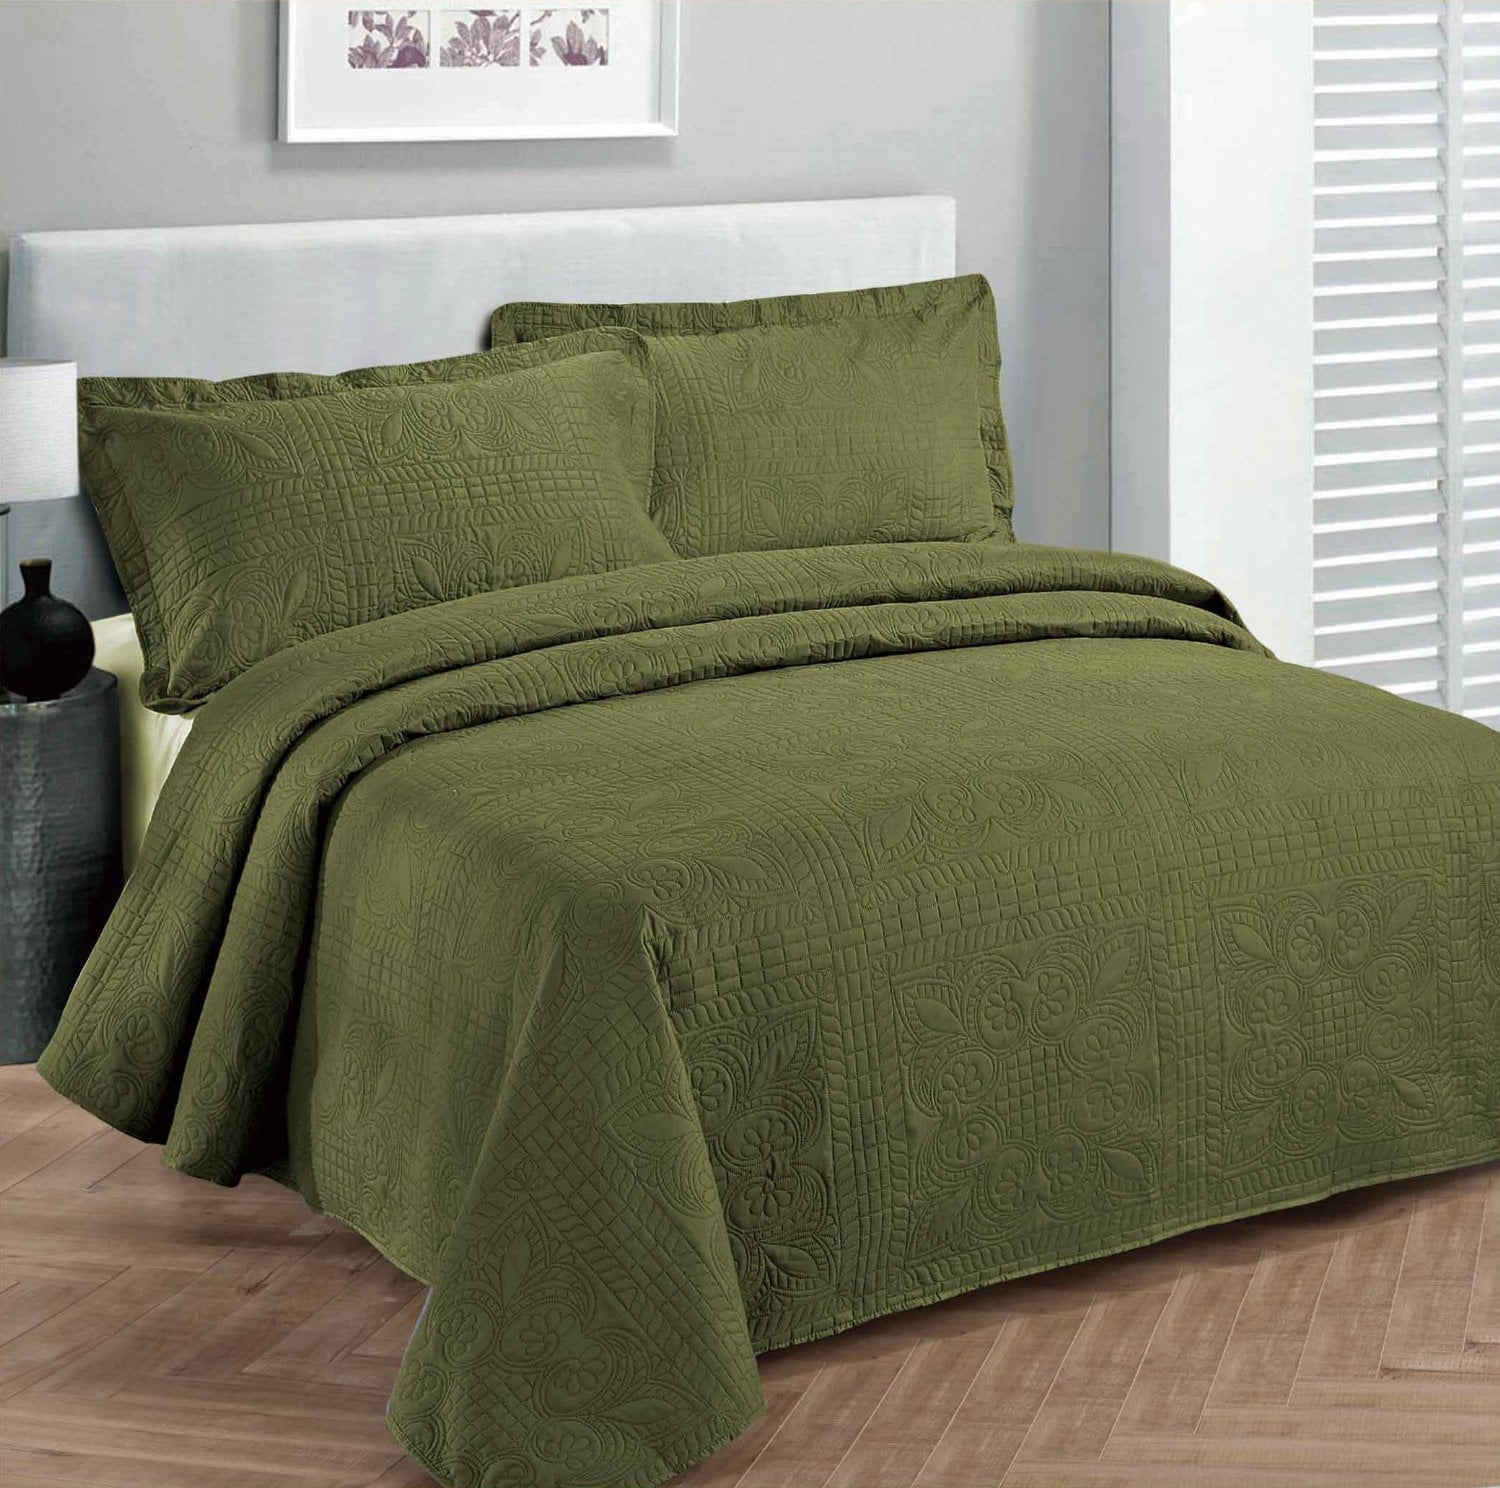 Fancy Collection 2pc Bed Spread, Extra Wide Comforter For King Size Bed